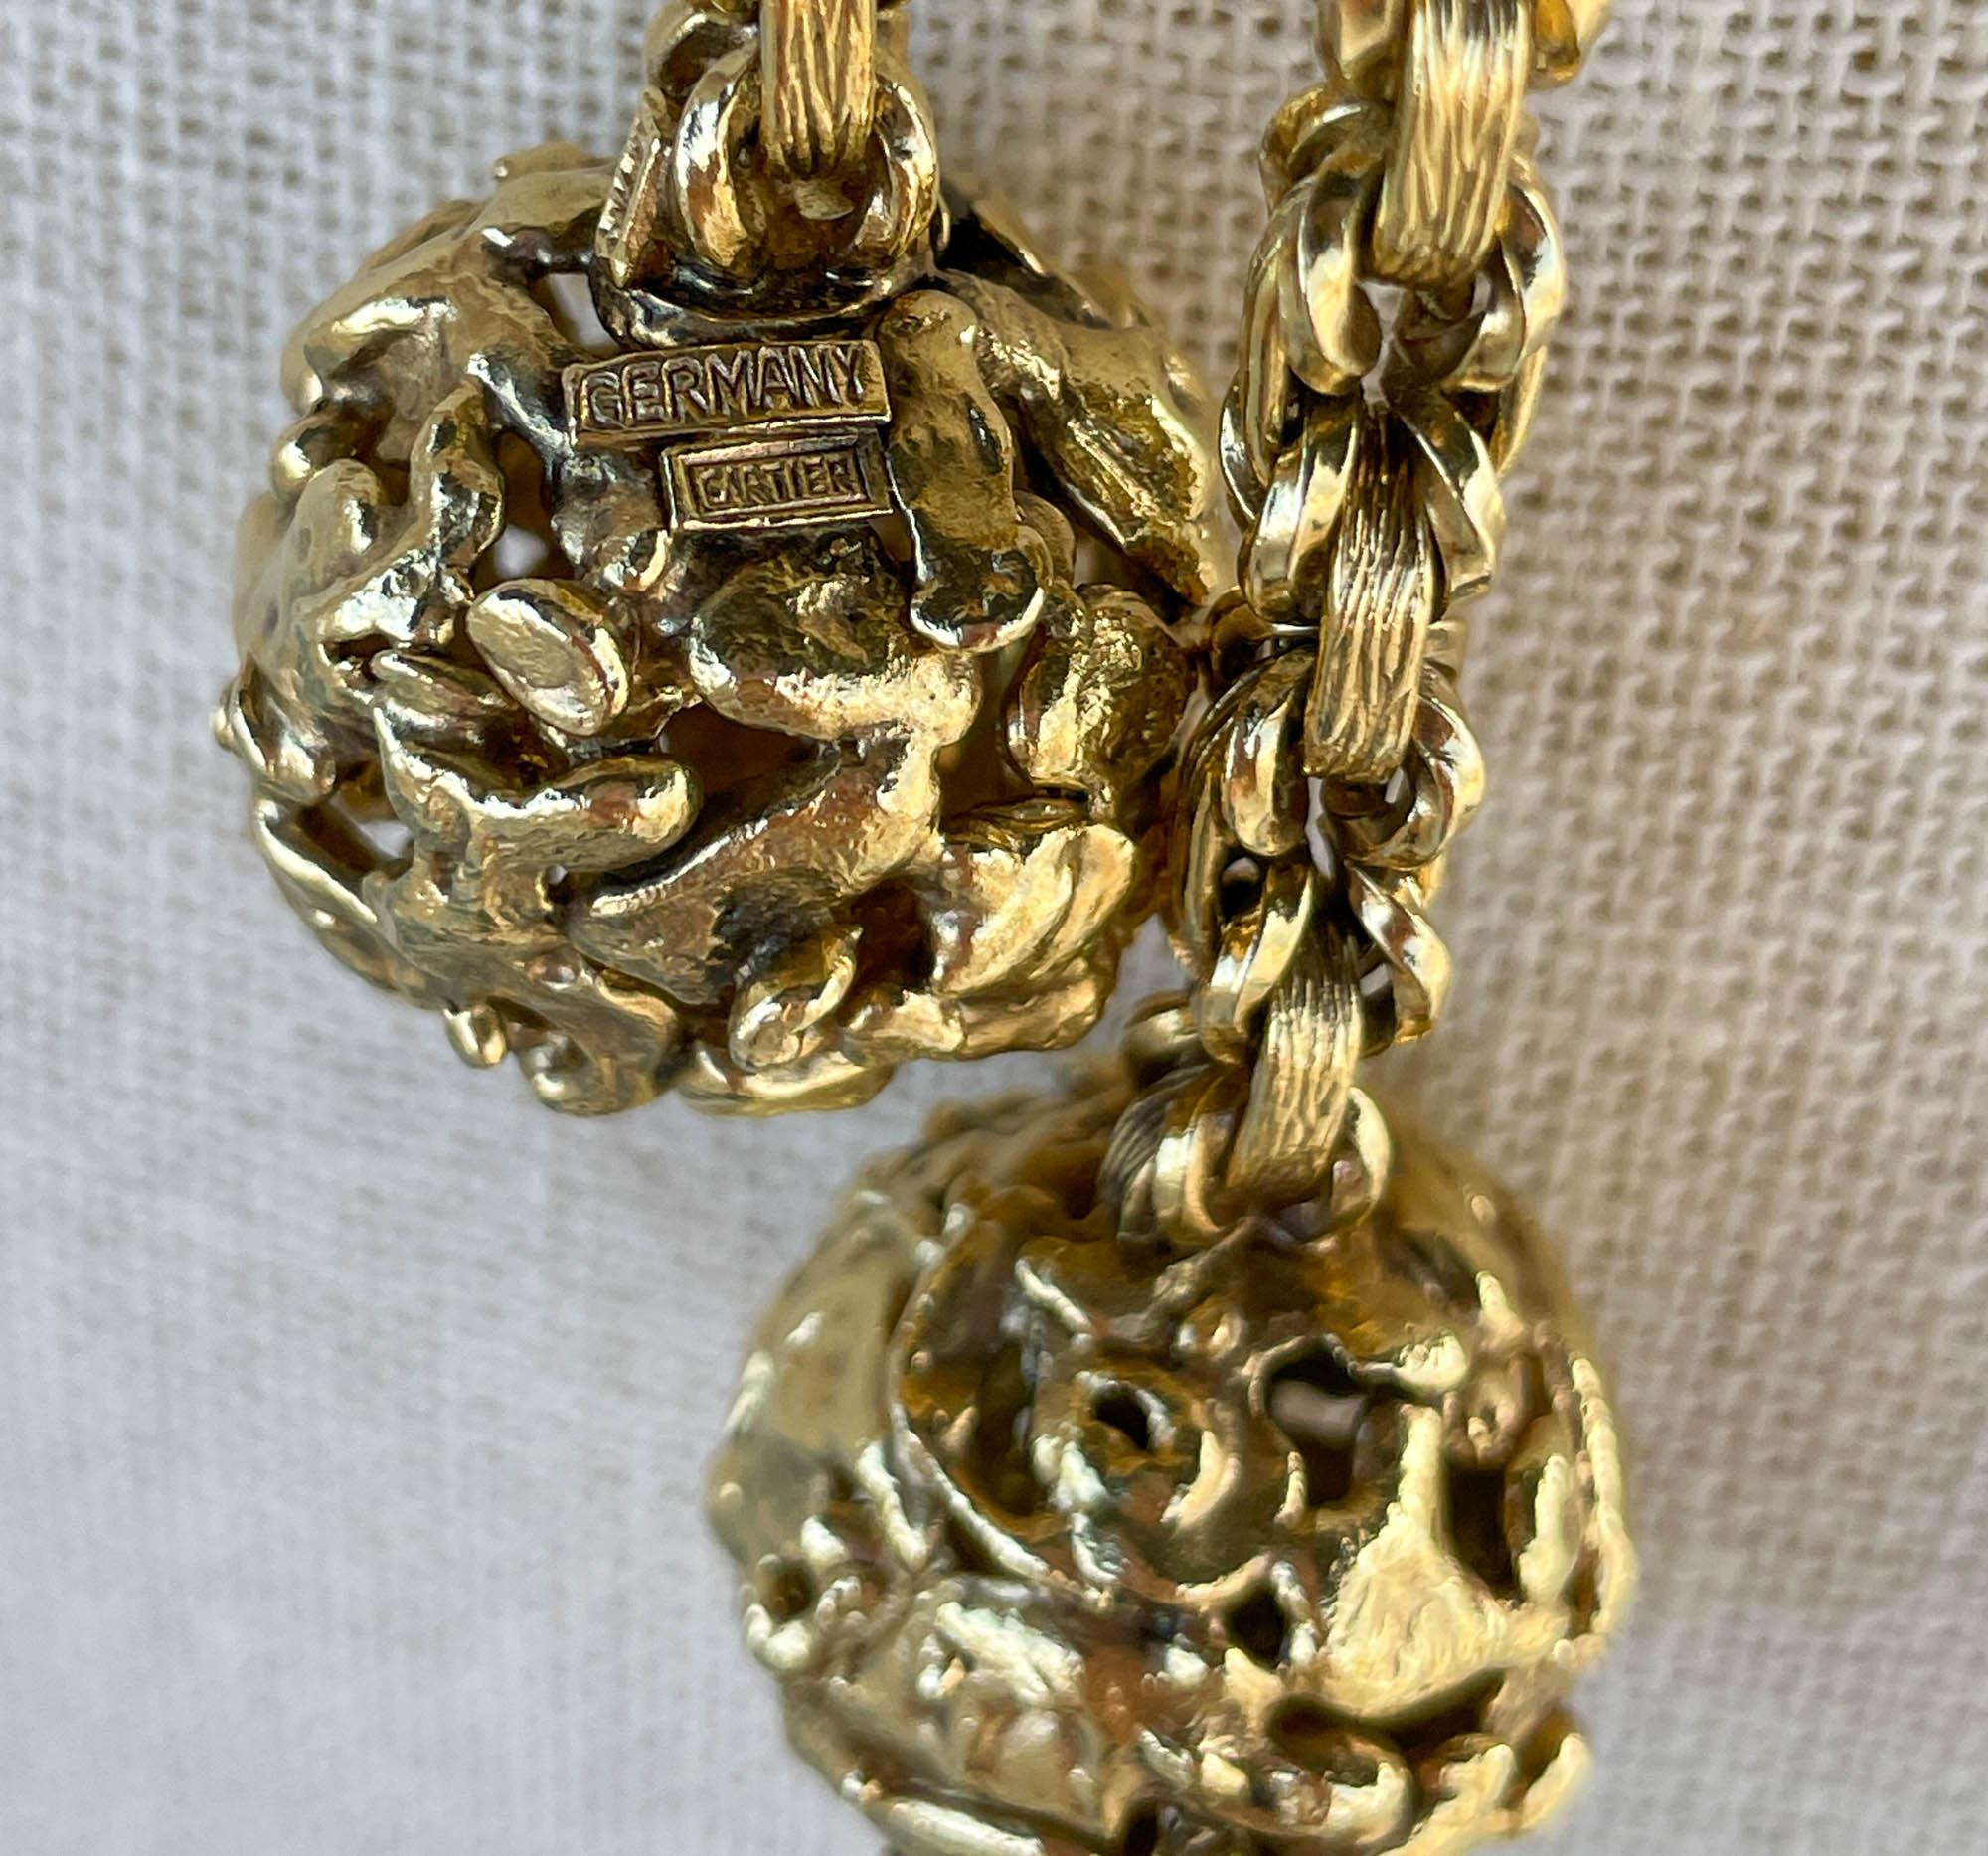 Cartier Germany 18k Yellow Gold Heavy Rope Chain Necklace
The chain is 45.5 inches long.
The total weight of the necklace is 266 grams. 

Please view our photos and videos for more details.

Good vintage condition, minor evidence of wear, some tiny